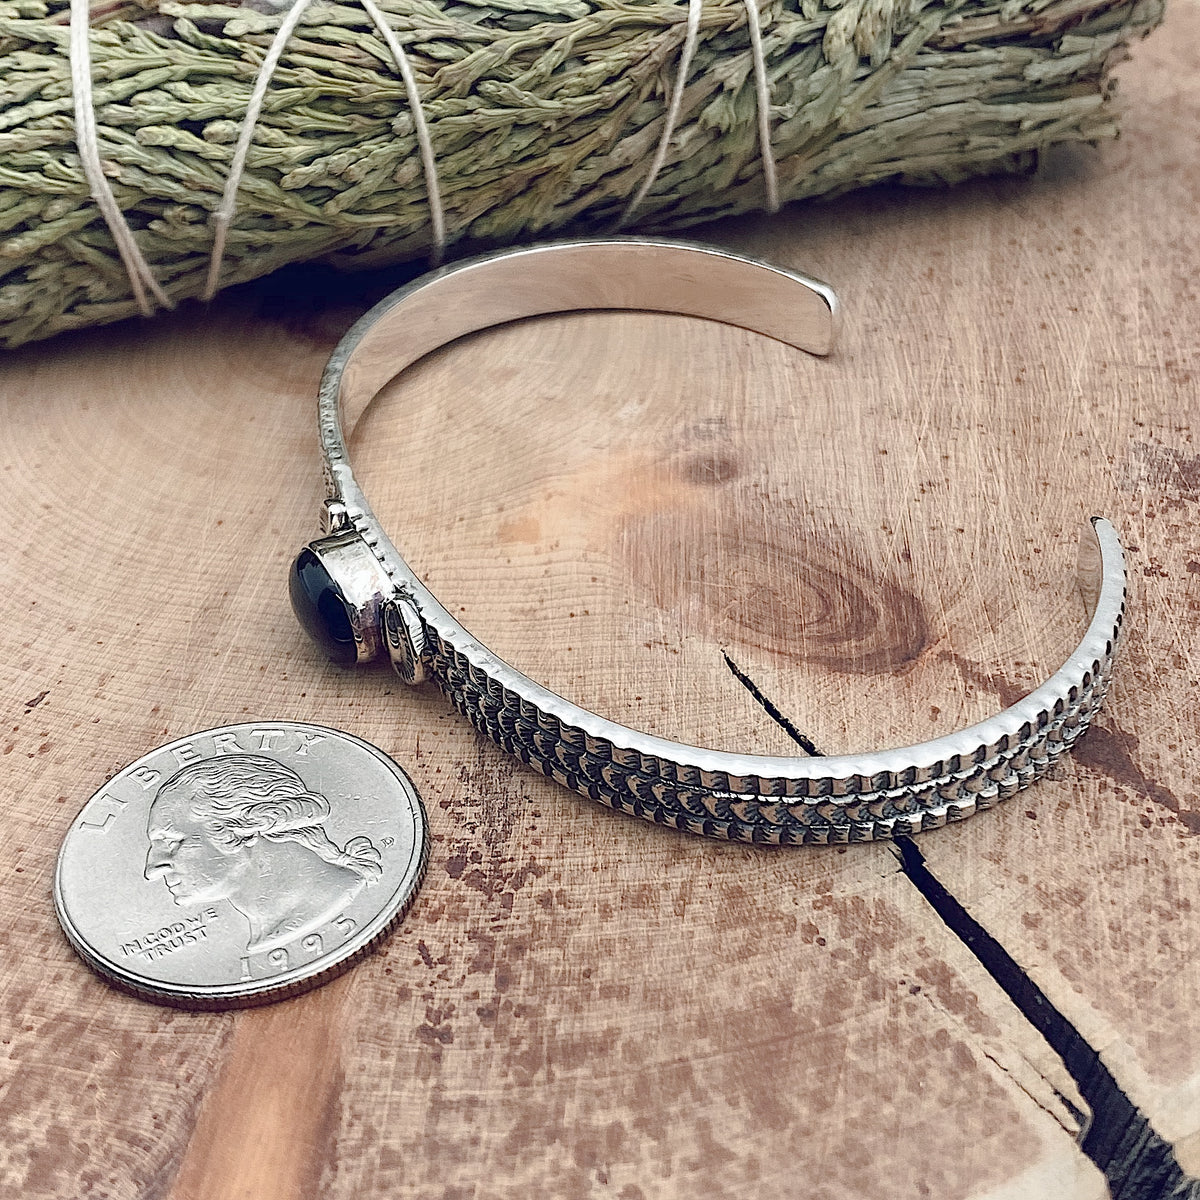 Comparison shot of a US quarter coin and a black onyx stamped cuff bracelet as viewed from the side